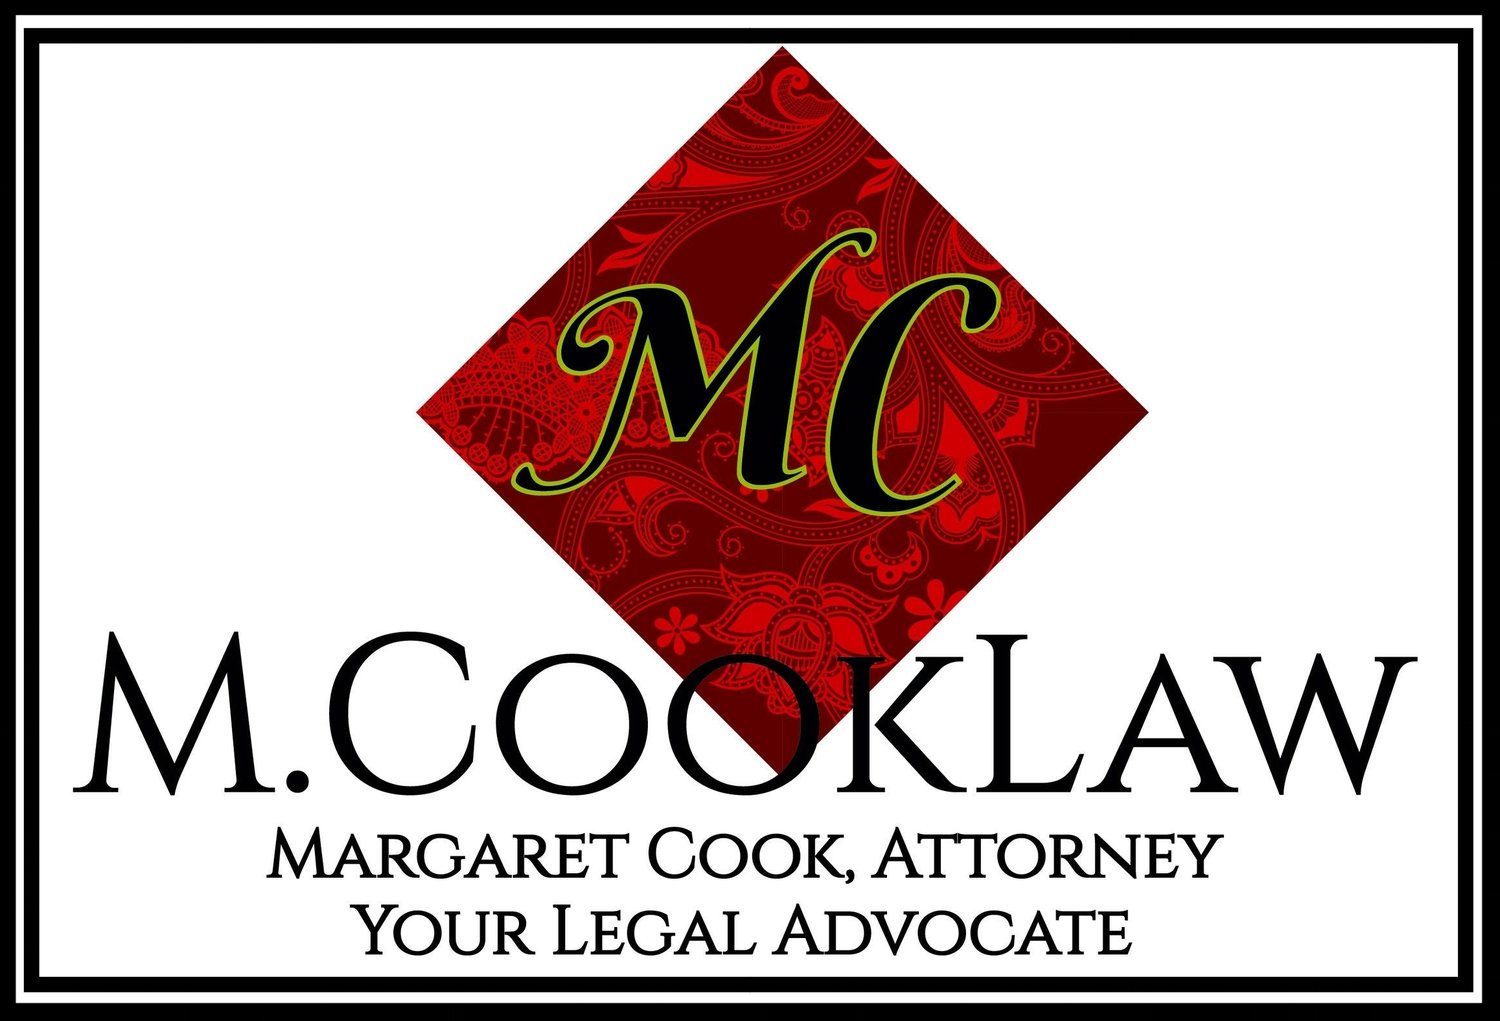 M. Cook Law